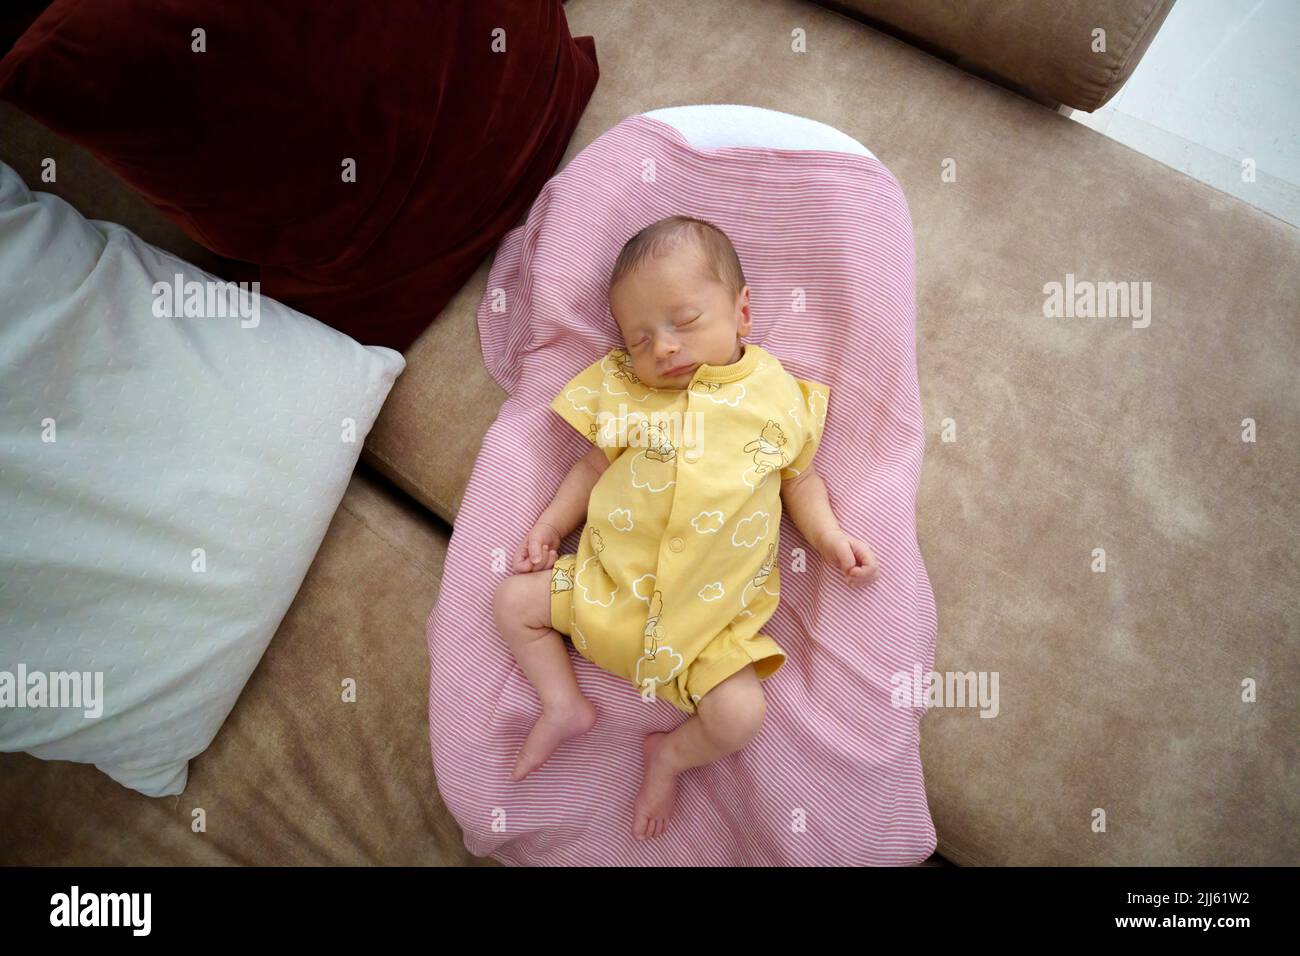 Overhead view of a baby sleeping on a sofa Stock Photo